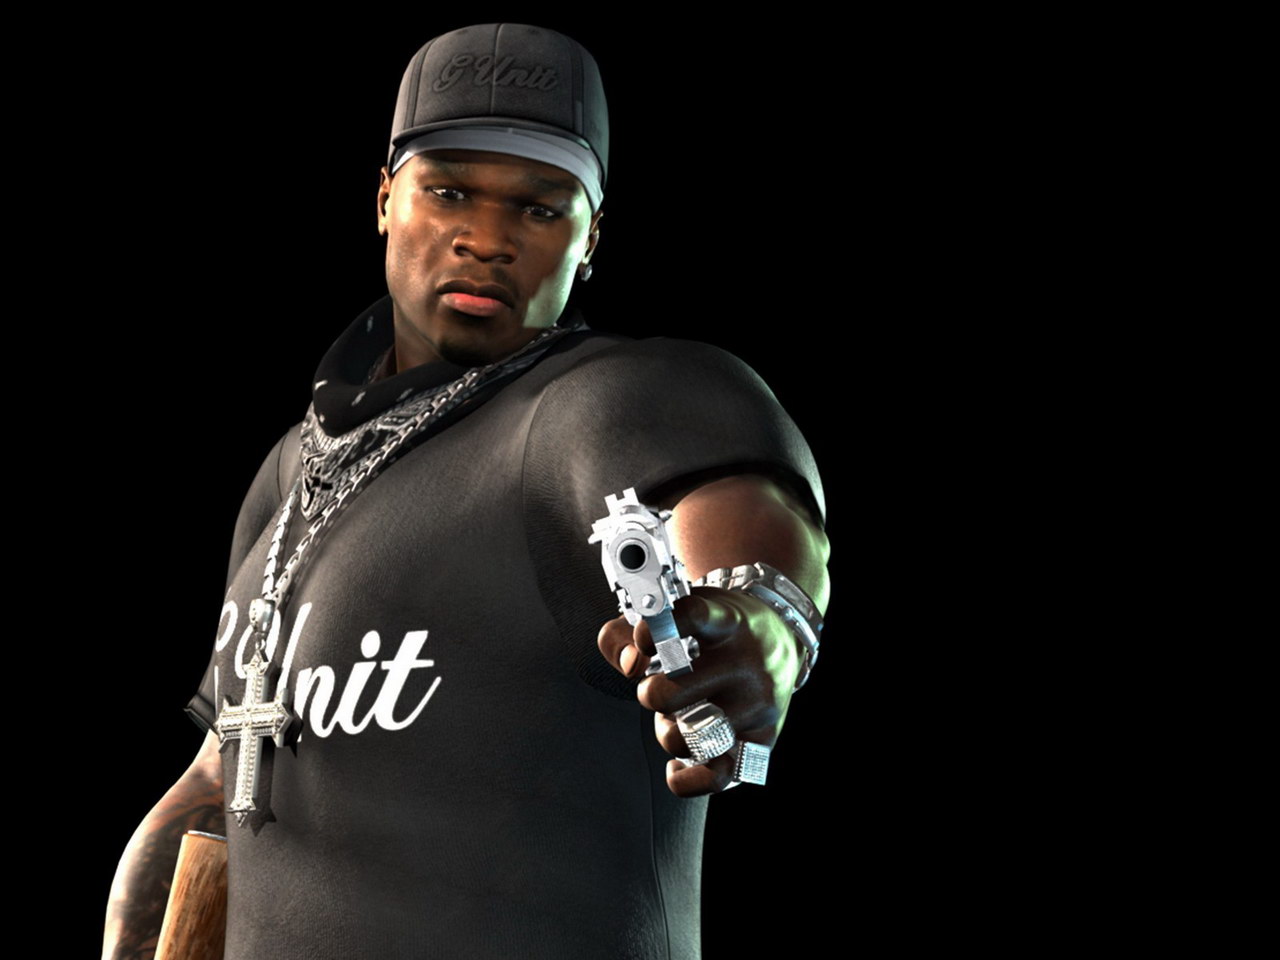 50 Cent Feat Nate Dogg 21 Questions 50セントft ネイト ドッグ 21クエスチョンズ Youtube 洋楽ヒットpv